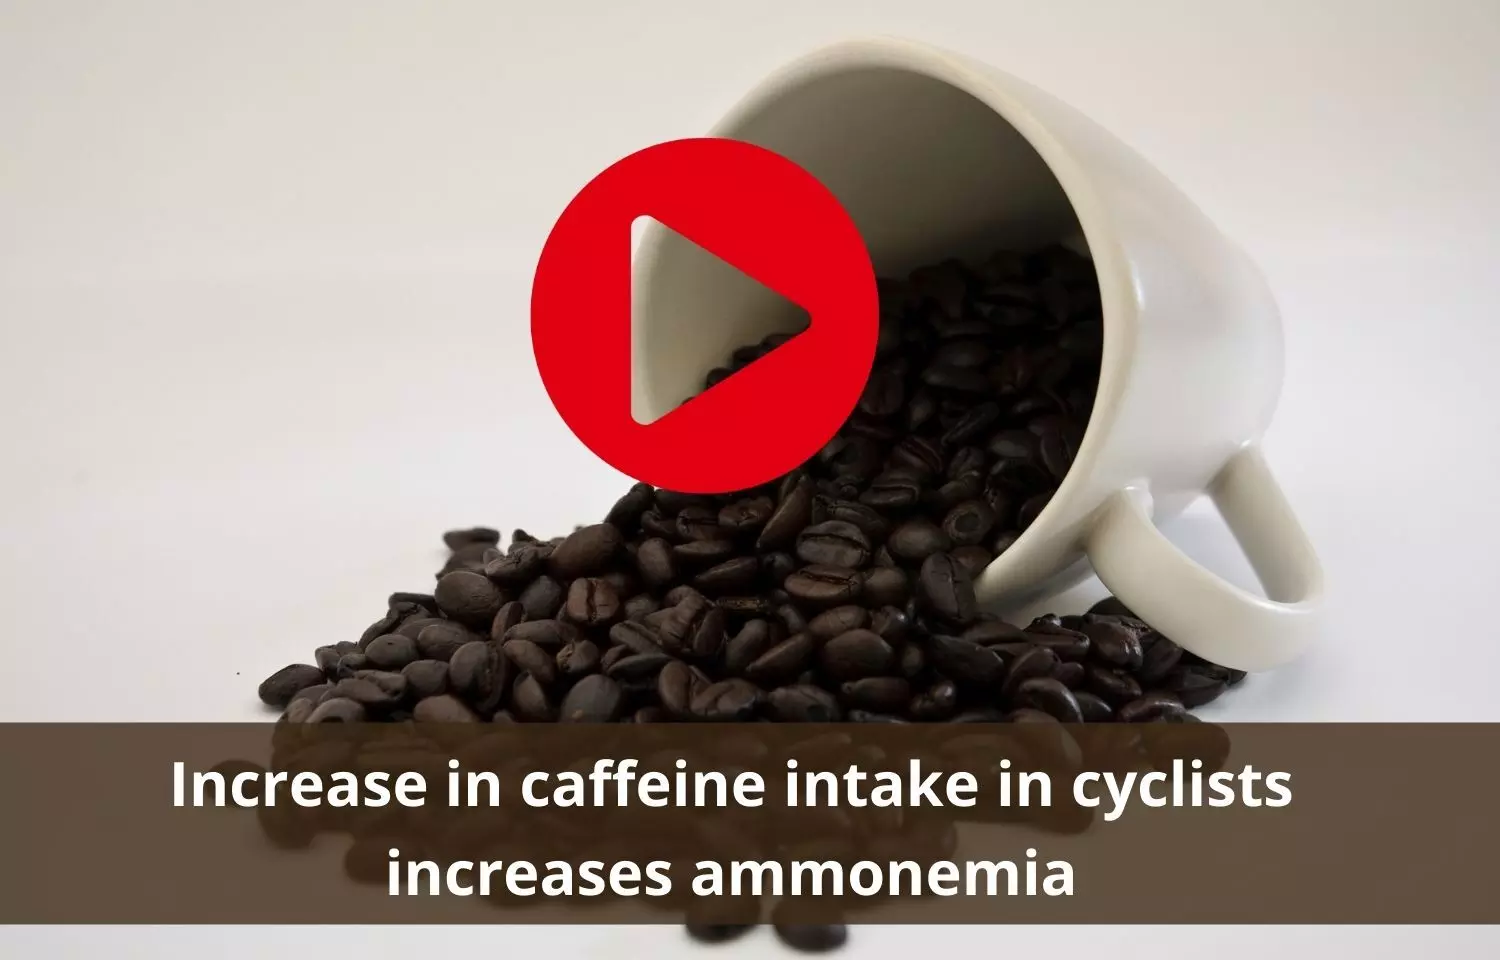 Caffeine intake in cyclists to decrease blood ammonia levels